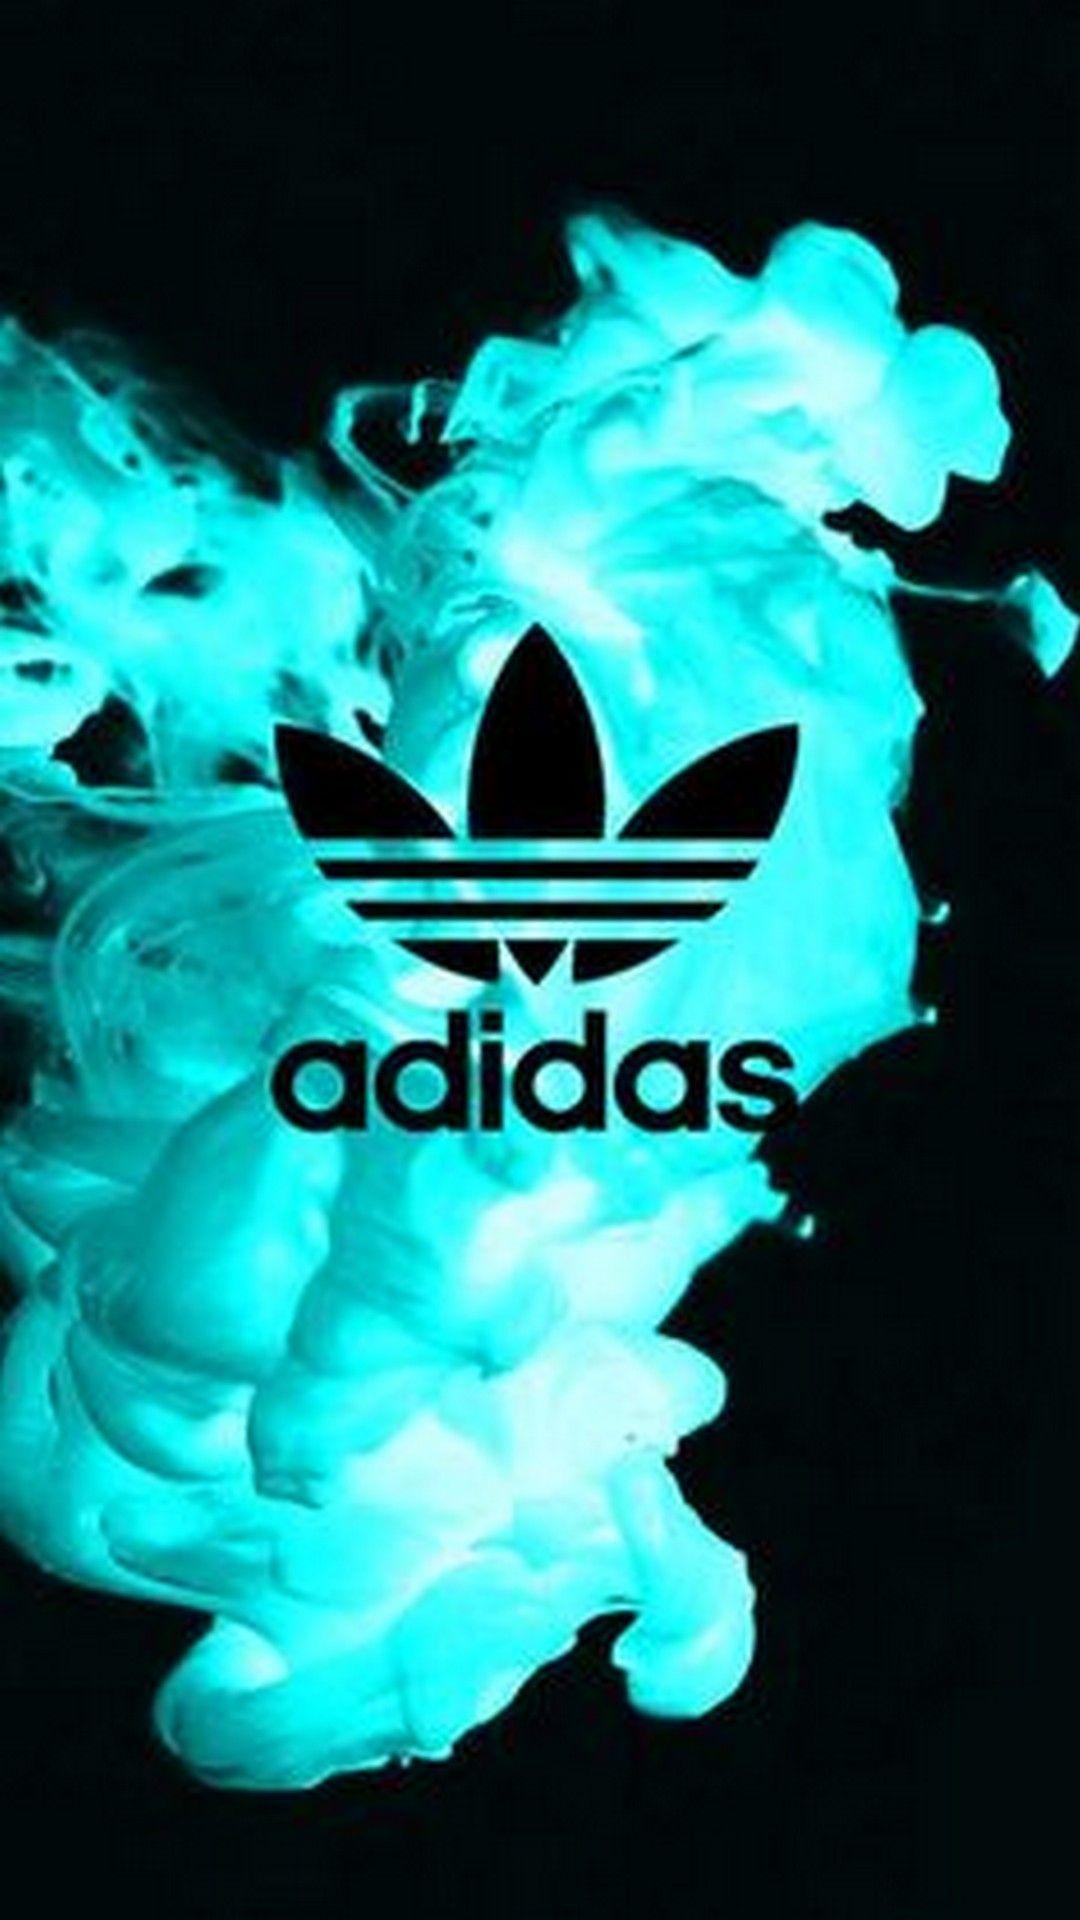 adidas cool wallpapers